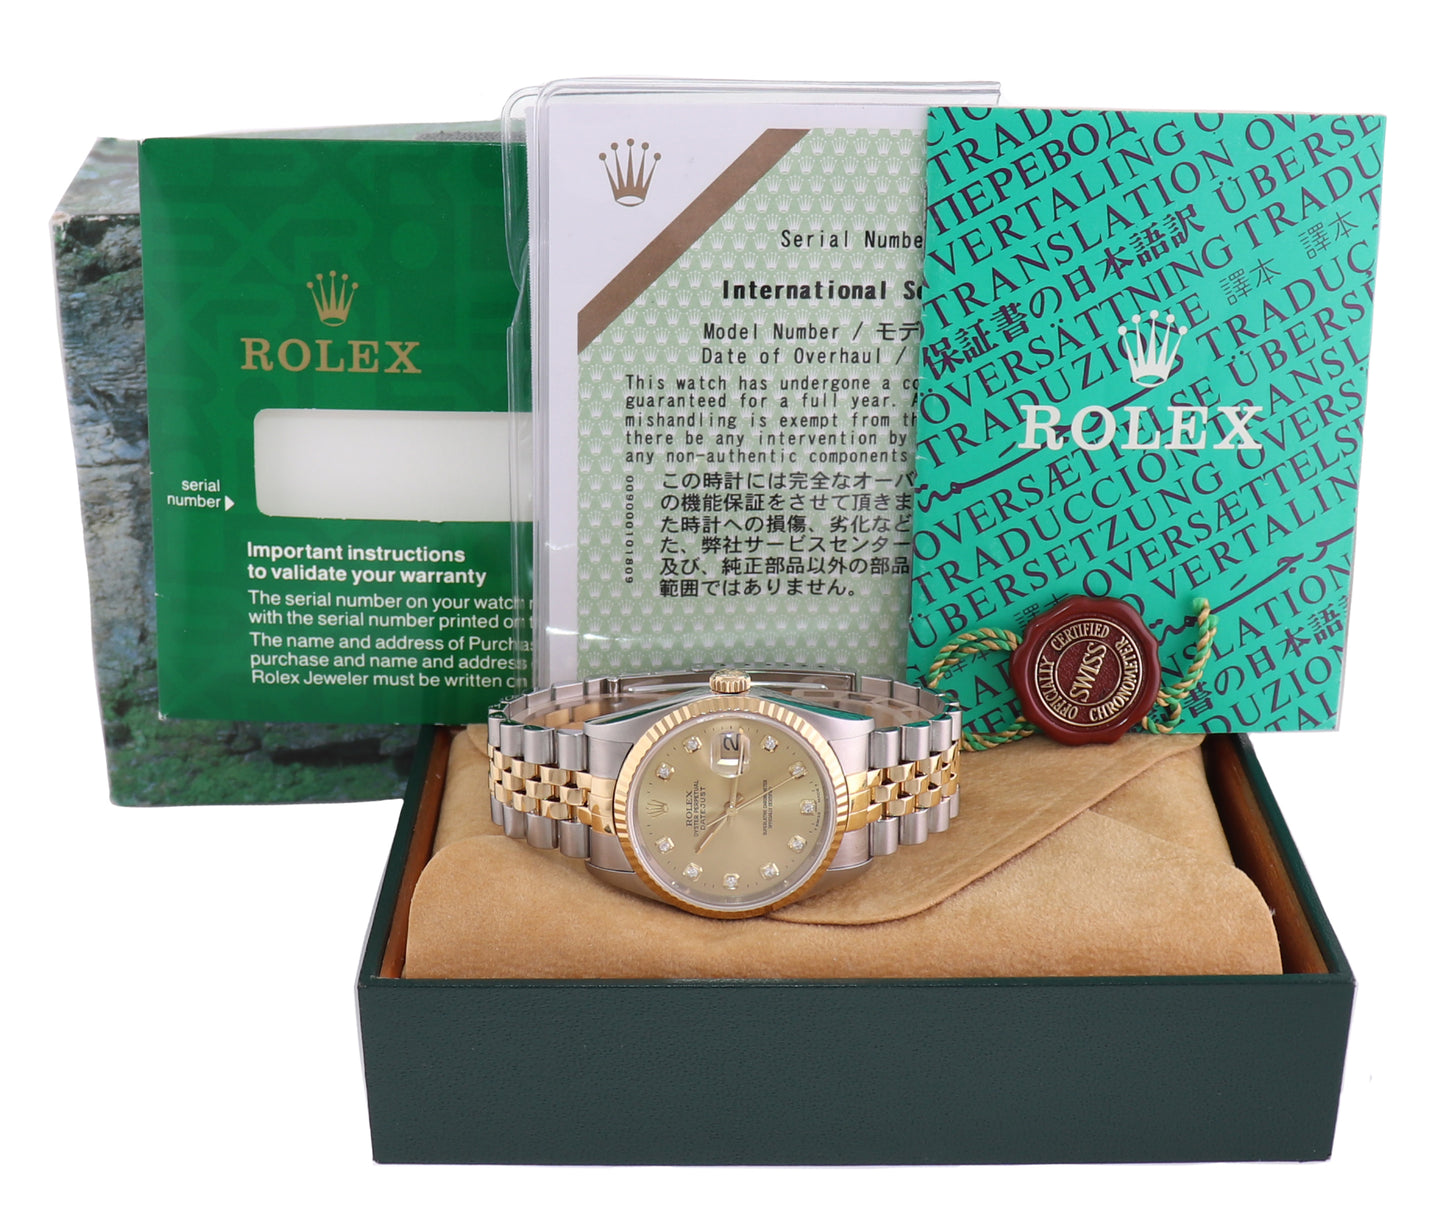 PAPERS Rolex DateJust 16233 Two Tone Gold Jubilee Champagne Diamond Watch